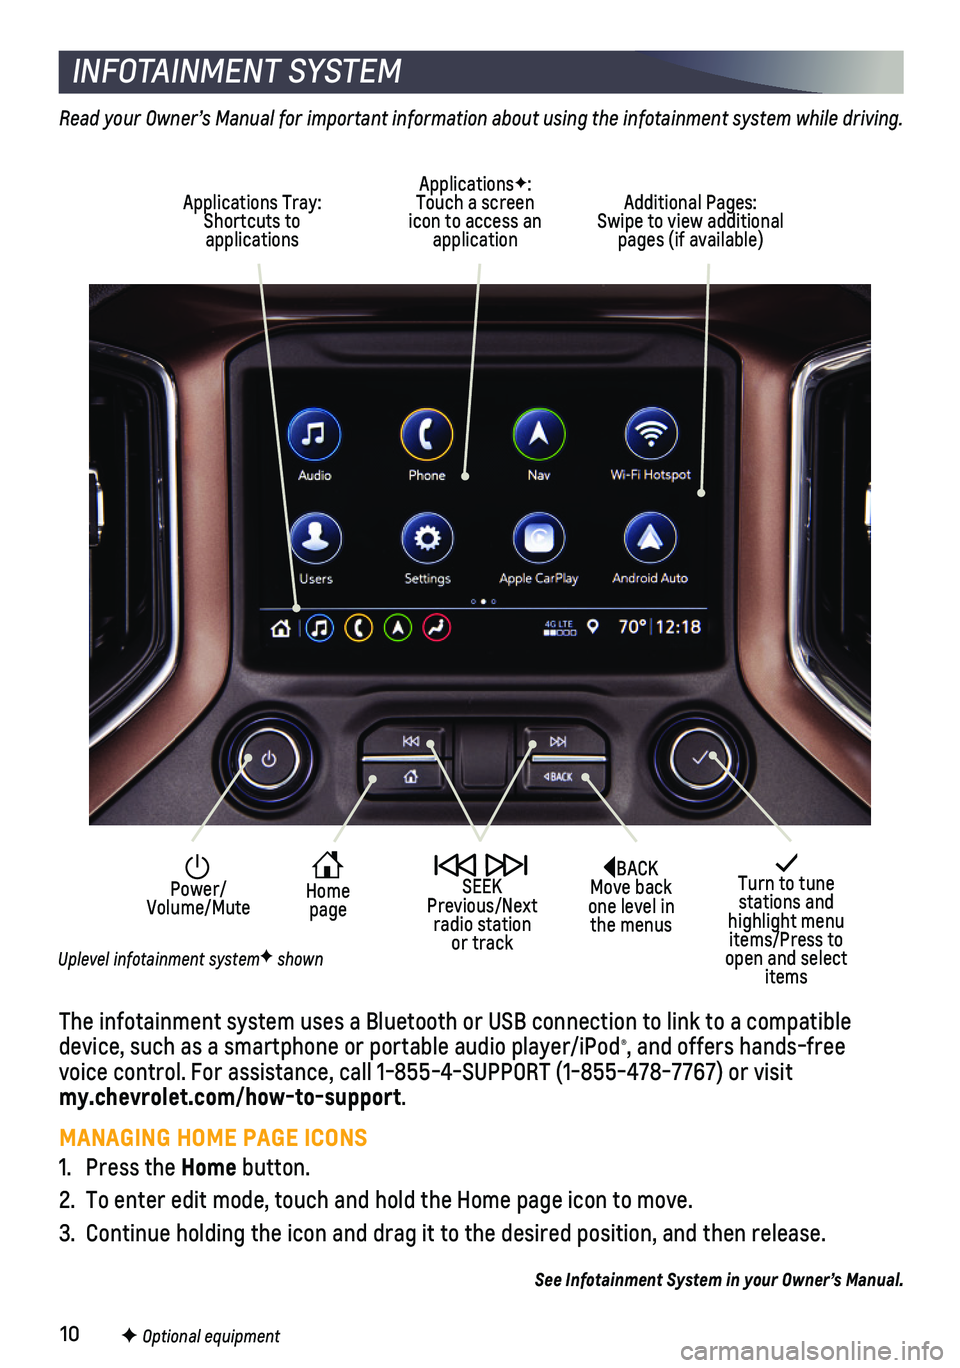 CHEVROLET SILVERADO 1500 2021  Get To Know Guide 10F Optional equipment
INFOTAINMENT SYSTEM
The infotainment system uses a Bluetooth or USB connection to link to a \
compatible device, such as a smartphone or portable audio player/iPod®, and offers